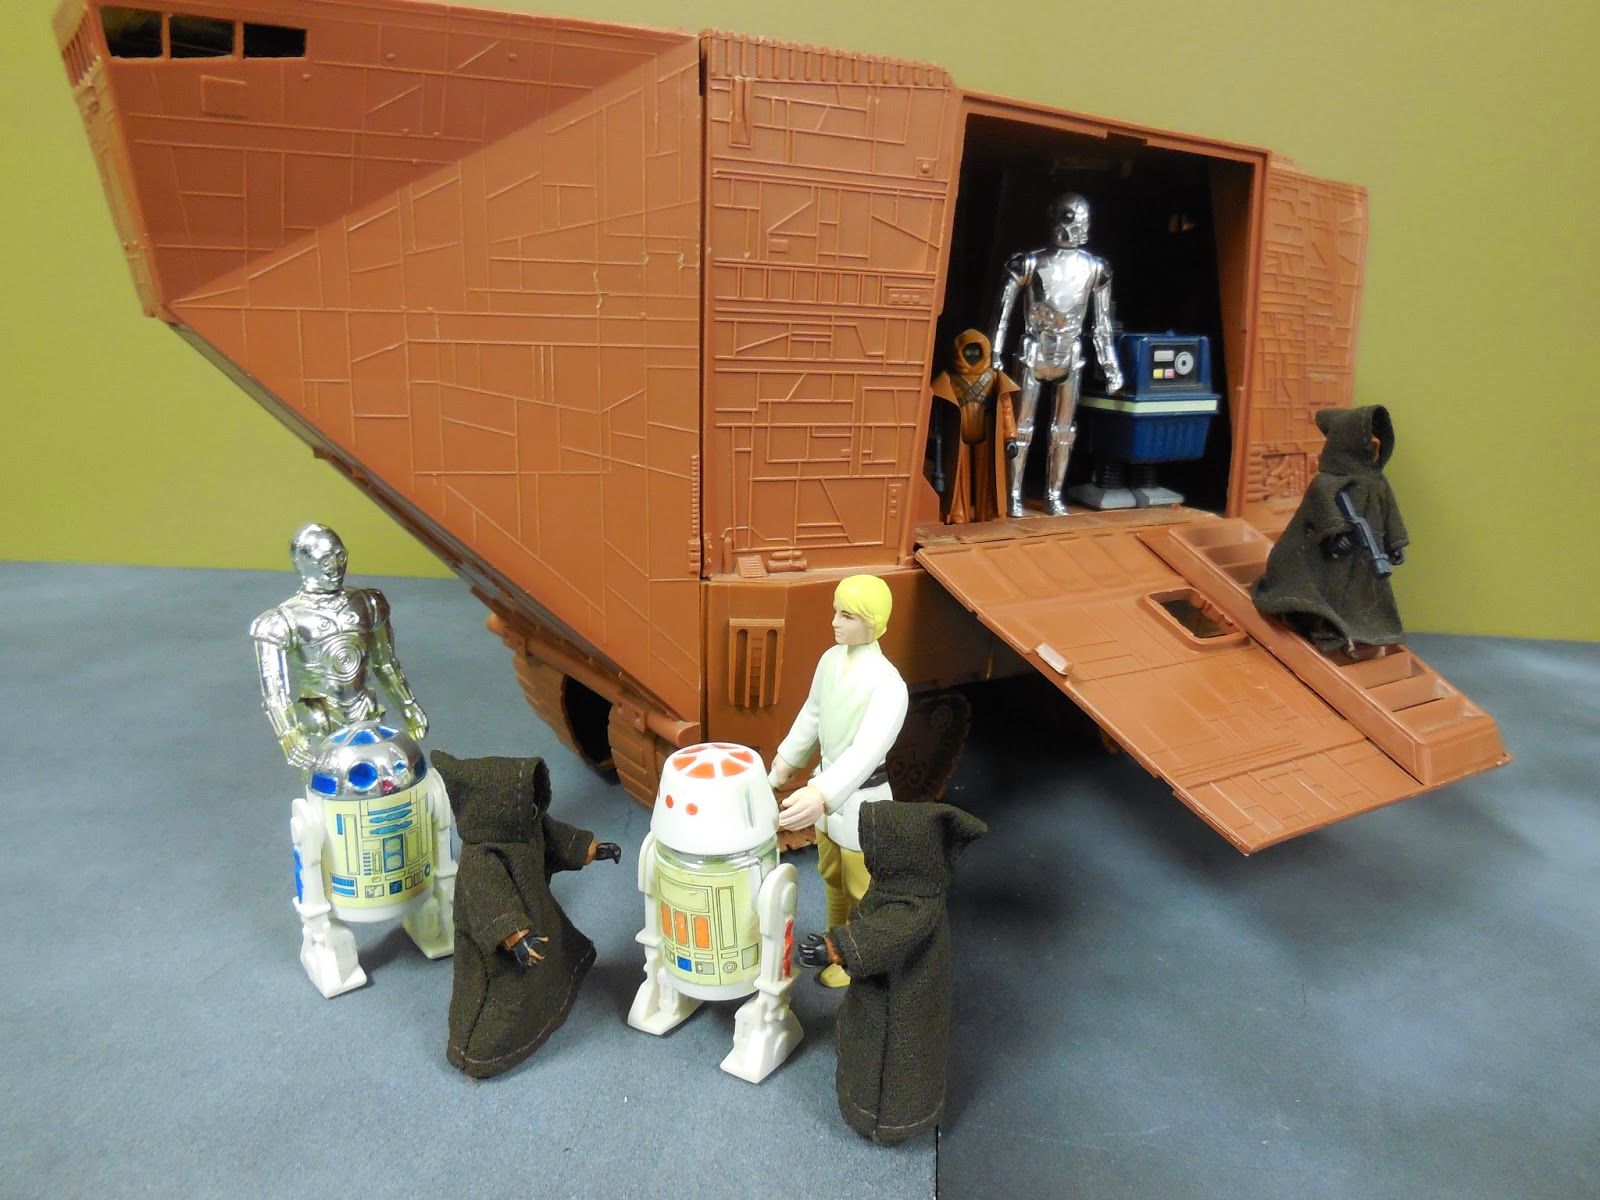 Star Wars: The 20 Lamest Toys From The Original Trilogy (And The 10 Best)